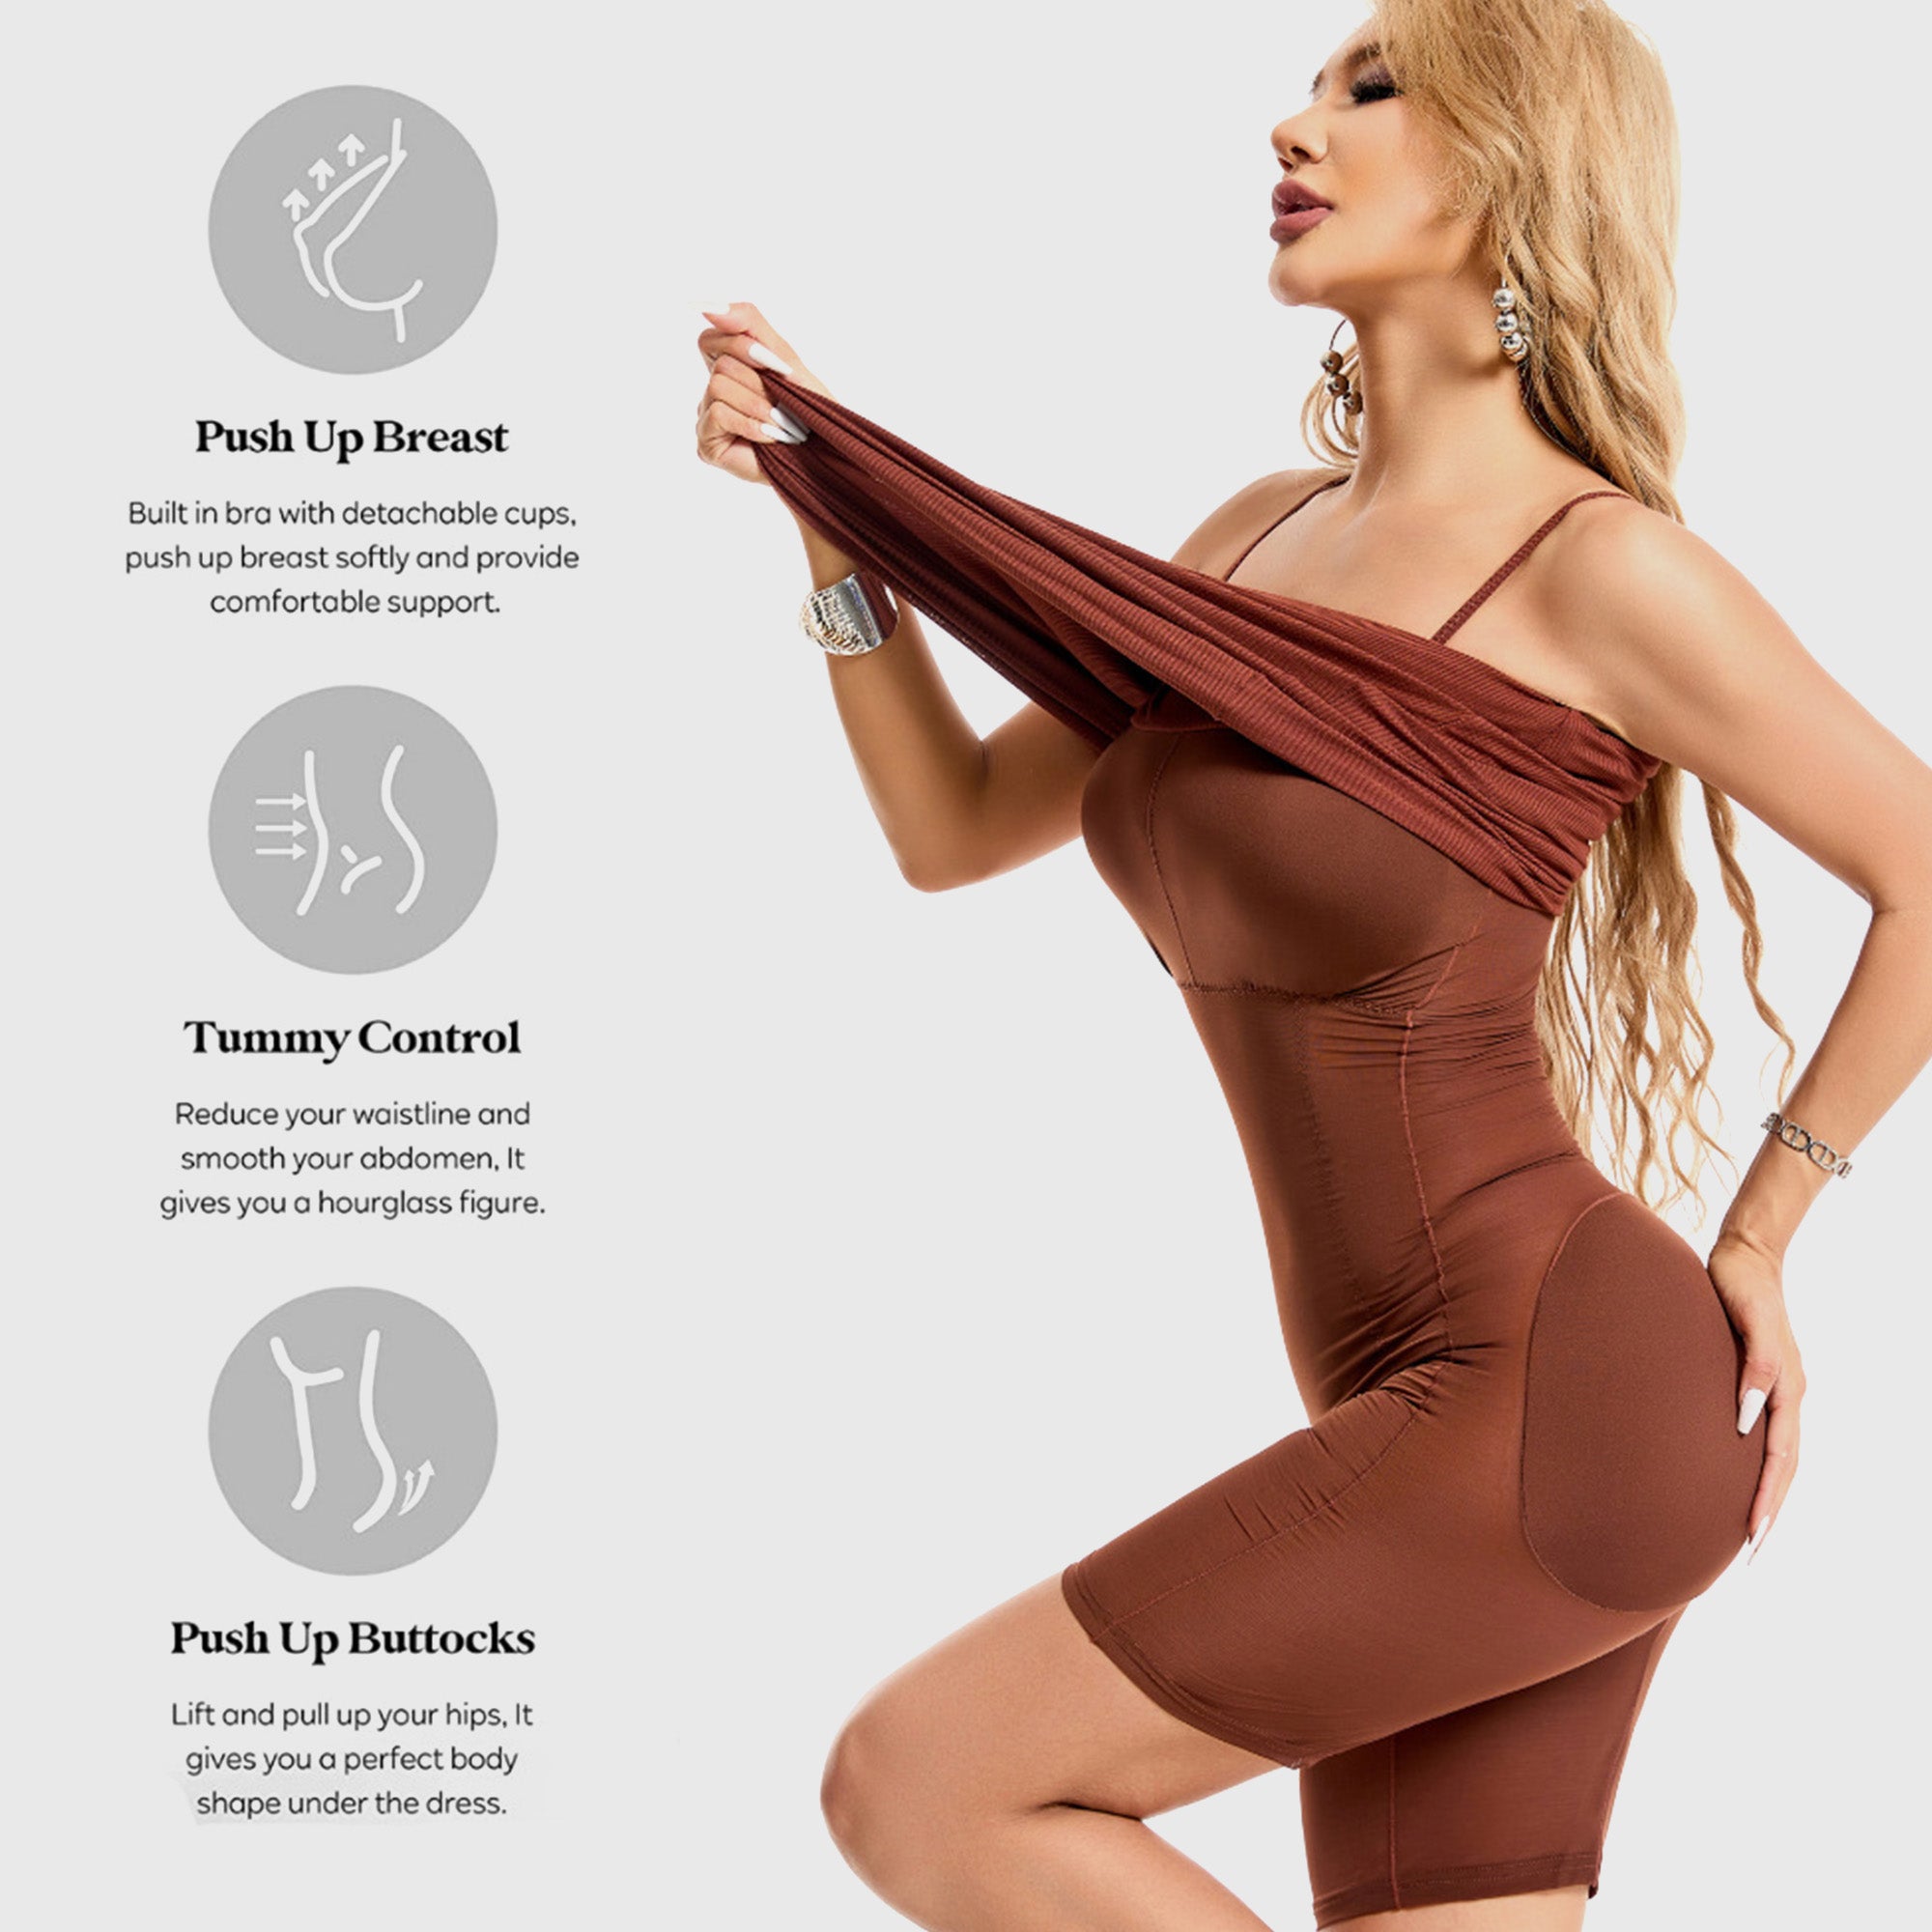 Tight Shaper Dress with Slim Tummy and Built-in 360° Firm and Slimming Butt Lifter